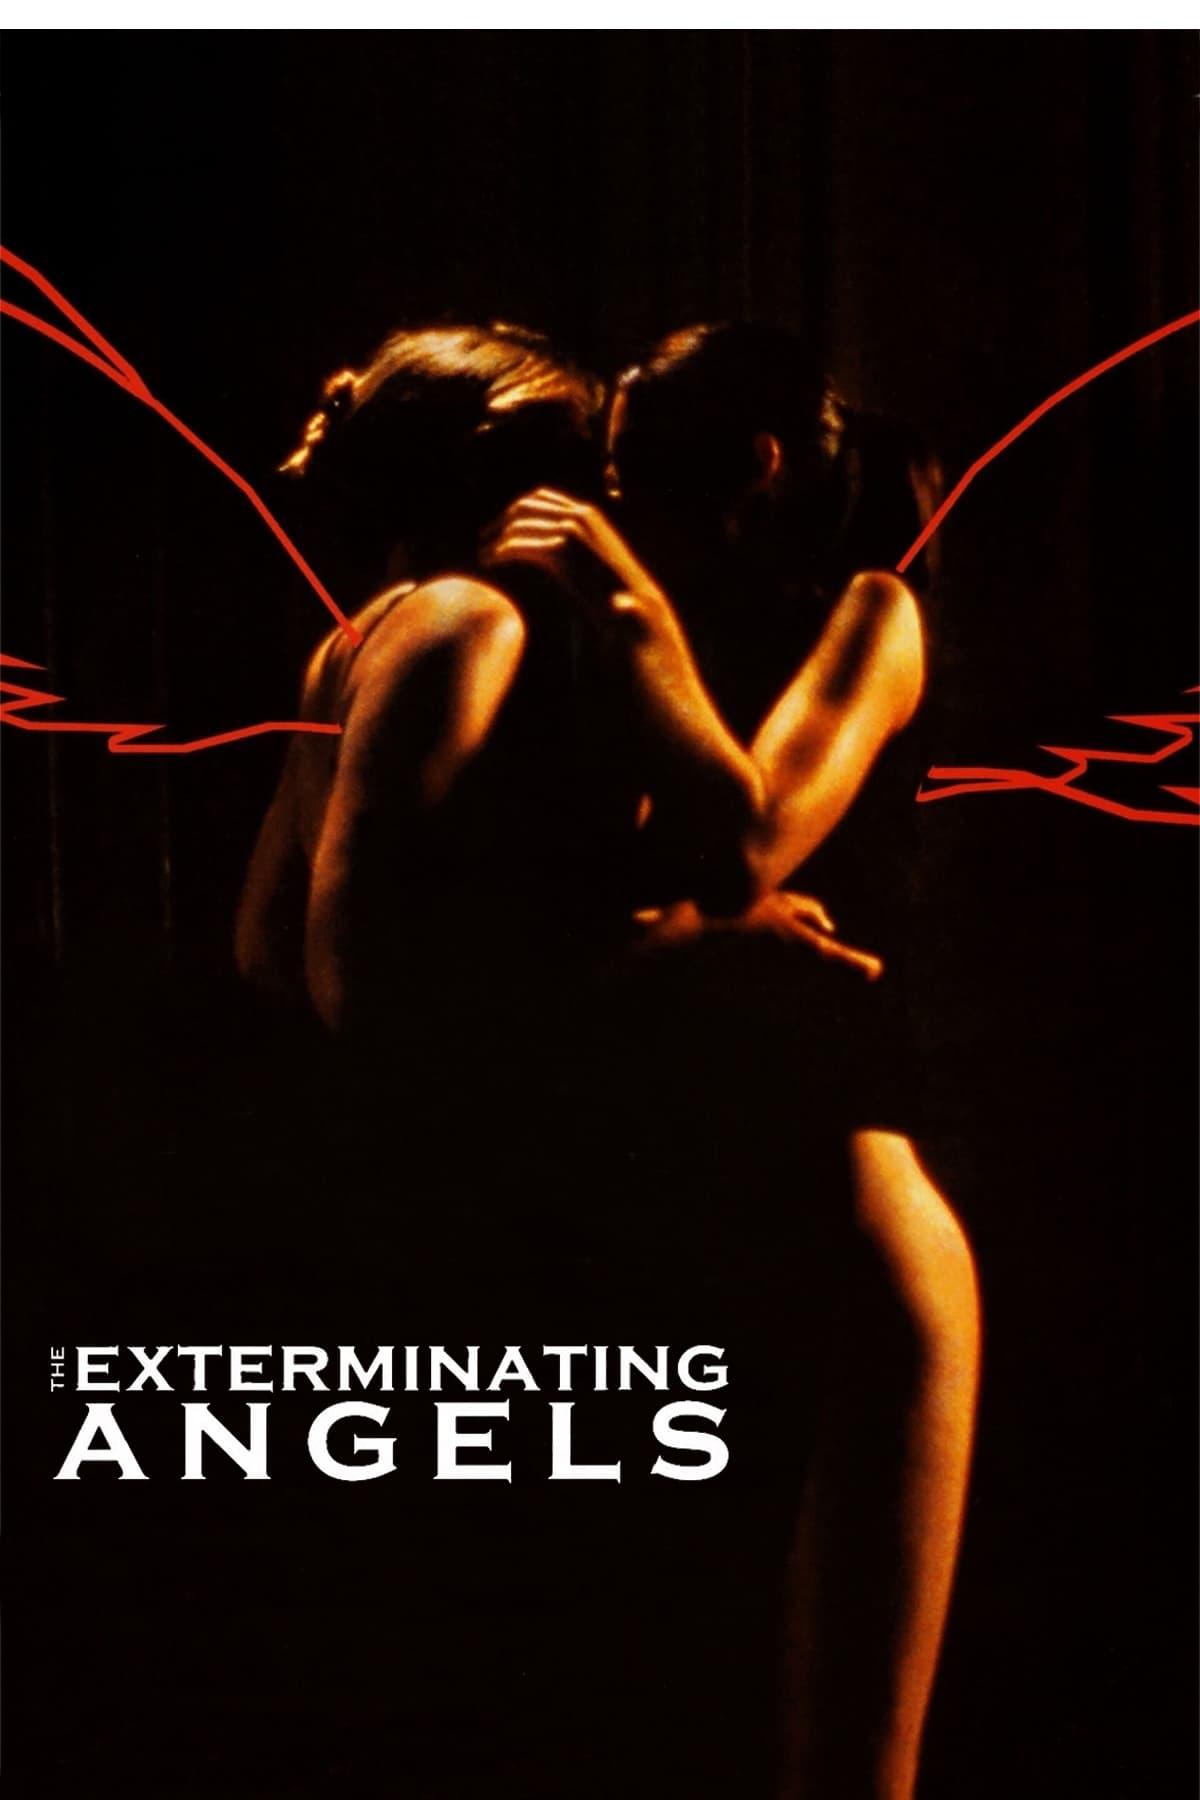 The Exterminating Angels poster